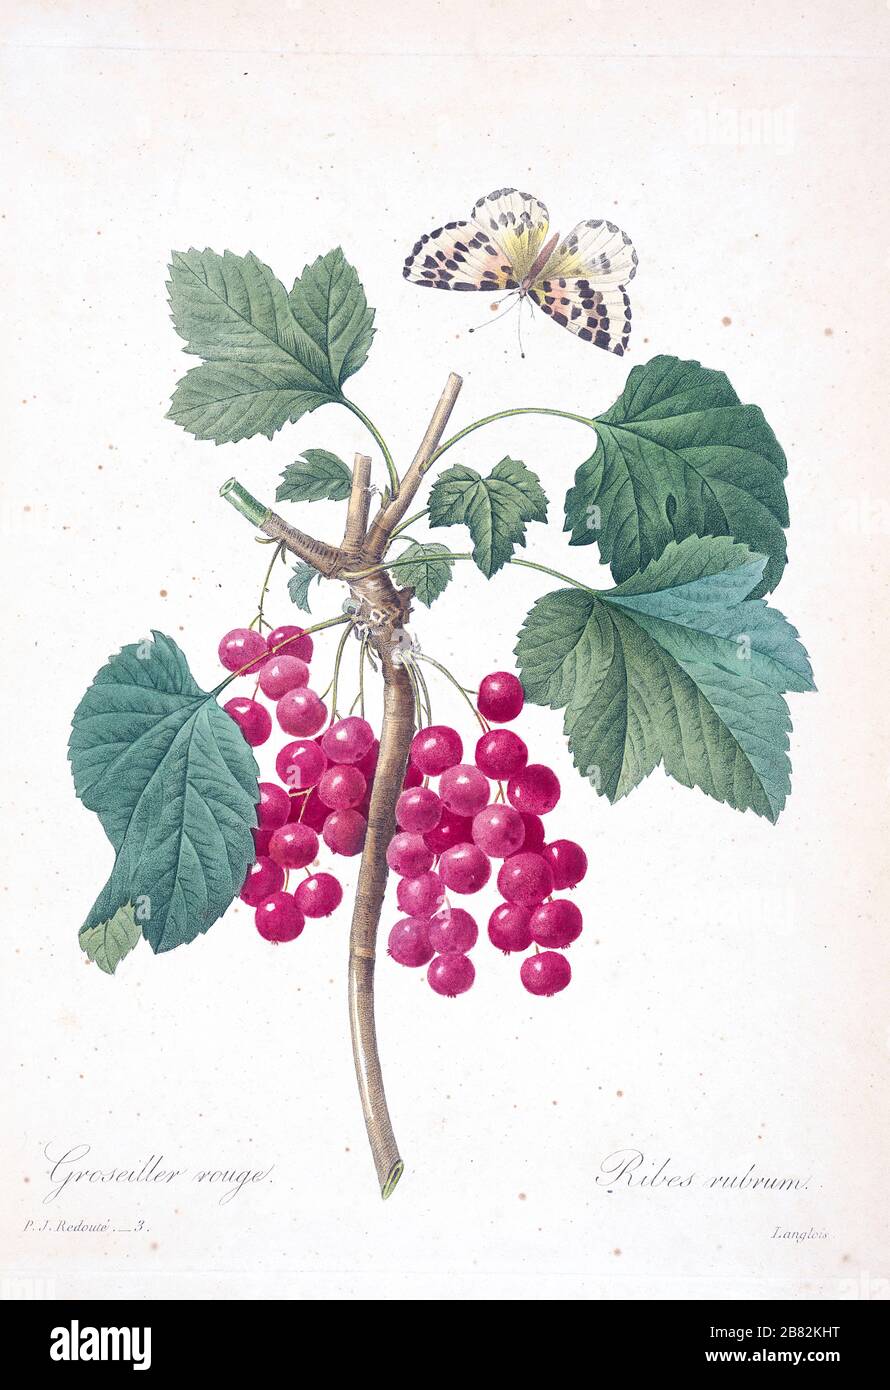 19th-century hand painted Engraving illustration of a Red currant (Ribes rubrum) and butterfly  by Pierre-Joseph Redoute. Published in Choix Des Plus Belles Fleurs, Paris (1827). by Redouté, Pierre Joseph, 1759-1840.; Chapuis, Jean Baptiste.; Ernest Panckoucke.; Langois, Dr.; Bessin, R.; Victor, fl. ca. 1820-1850. Stock Photo